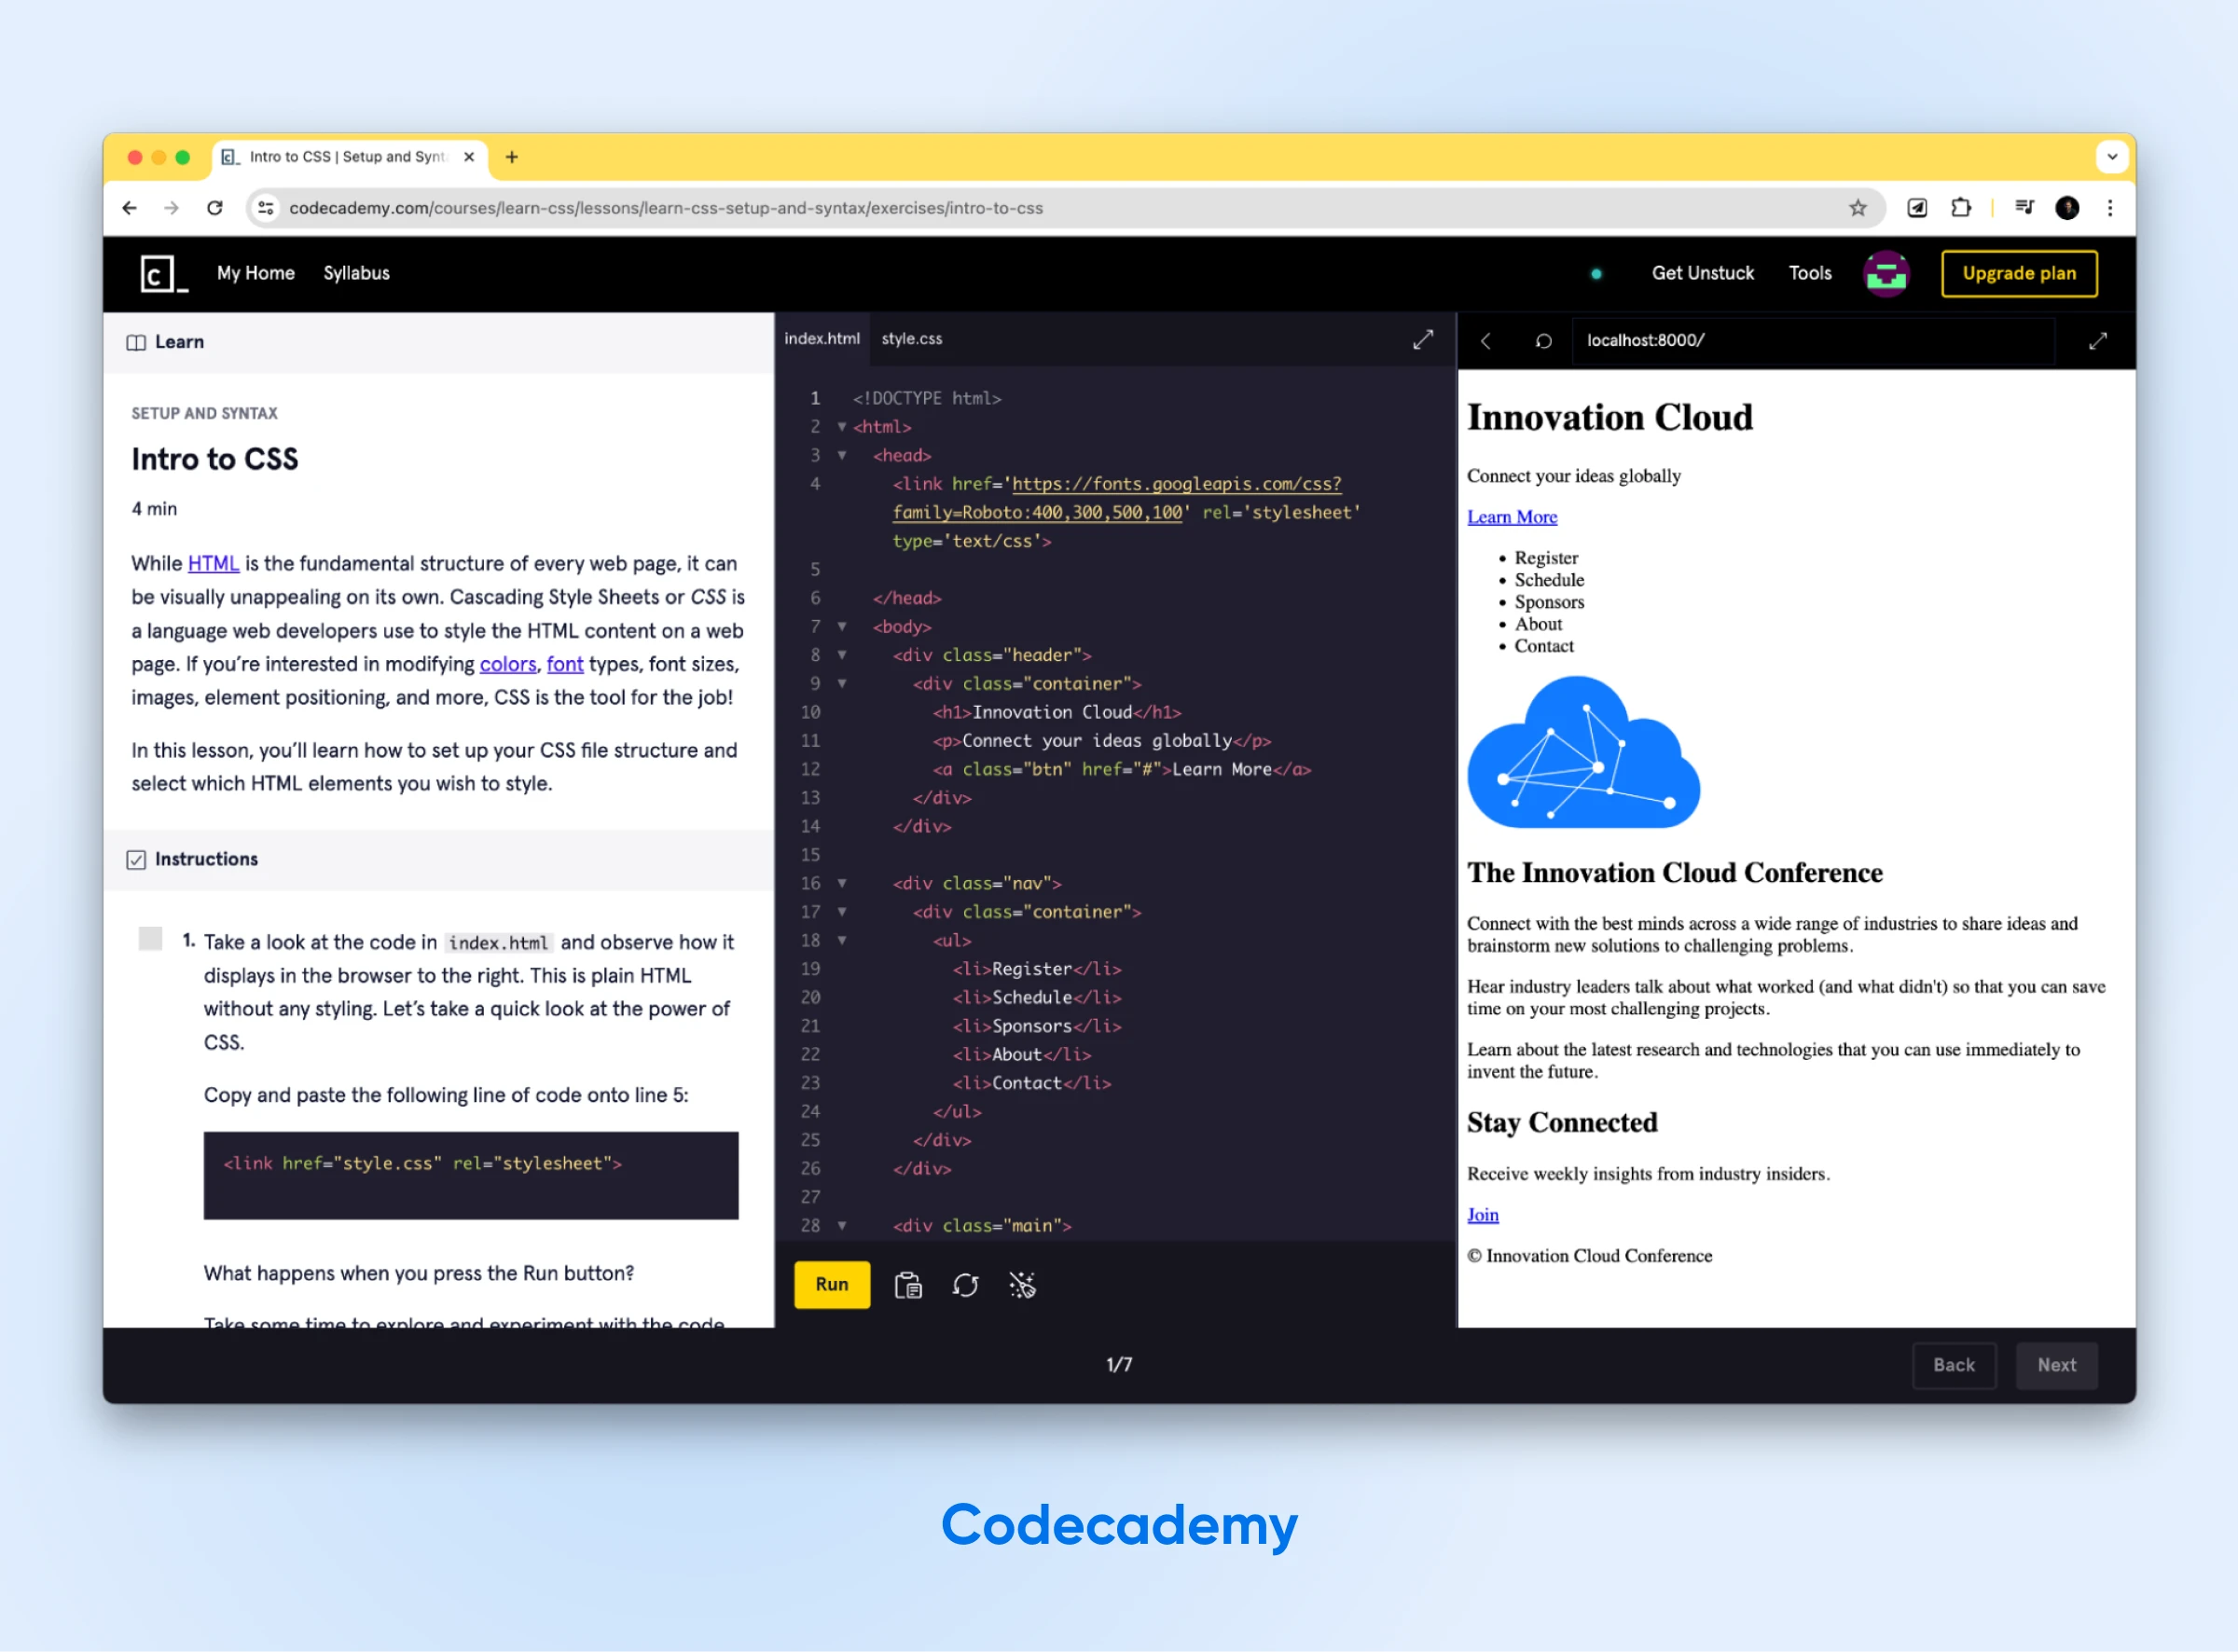 Glimpse into Codecademy's "Intro to CSS" with instructions and code. 